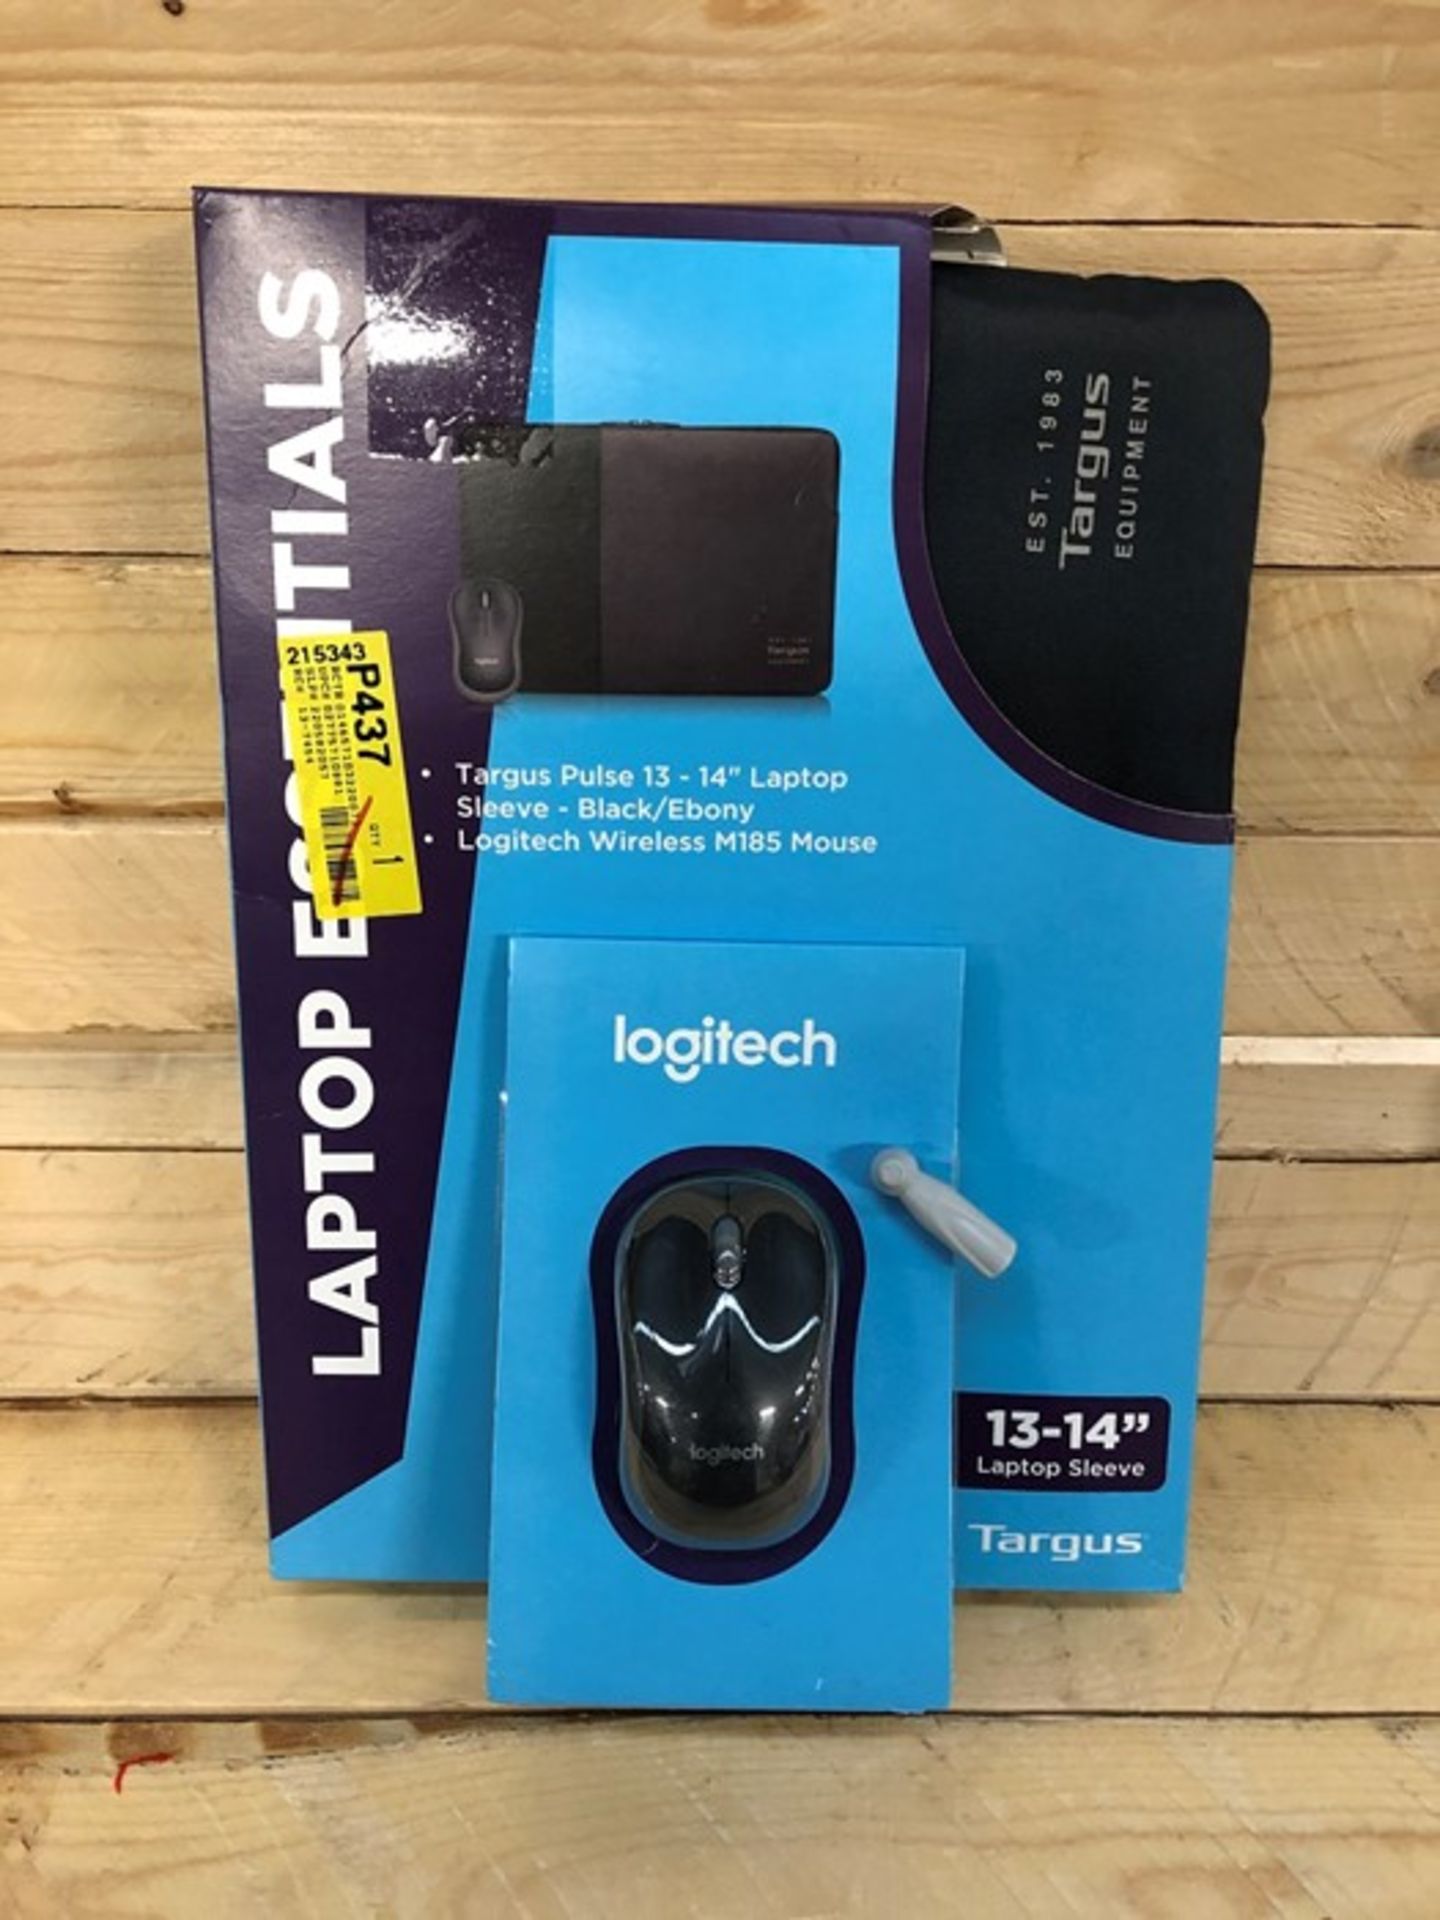 1 BOXED LOGITECH TARGUS 13-14' TABLET CASE AND MOUSE / RRP £20.00 / BL 5343 (VIEWING HIGHLY